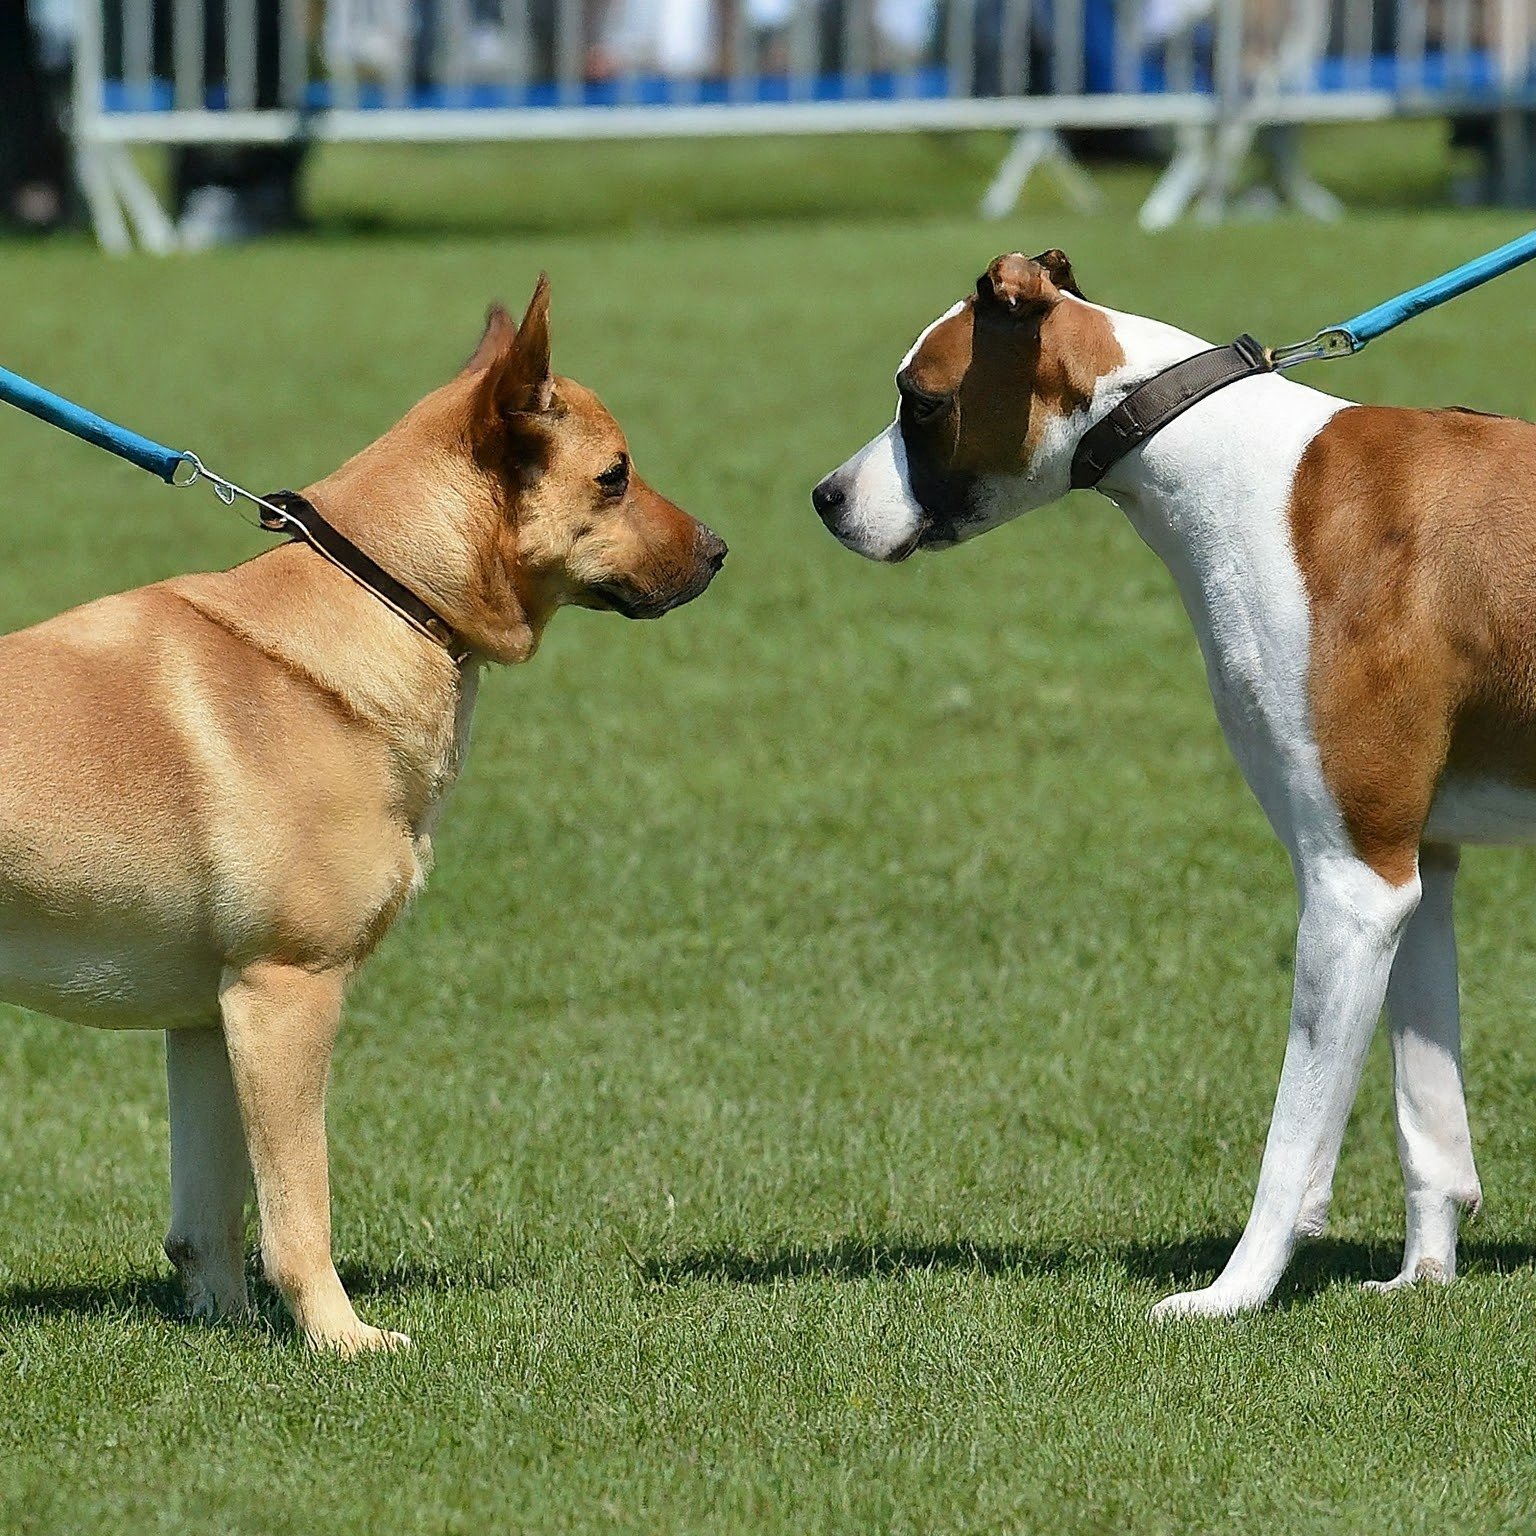 Two leashed dogs sniffing the ground in a park